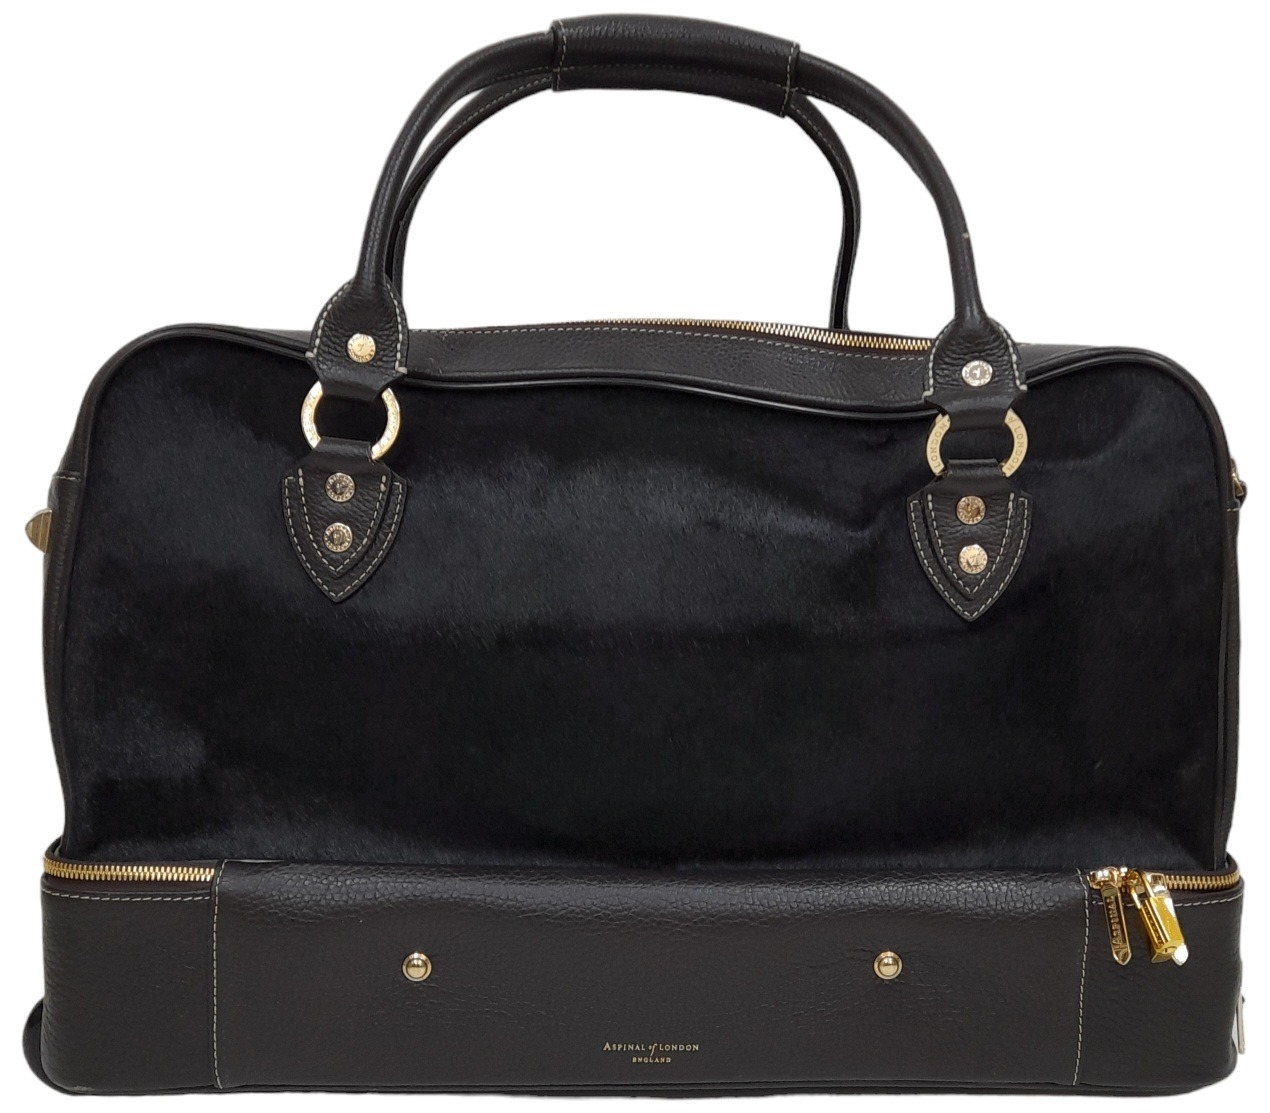 An Aspinal Brown Portofino Convertible Luggage Bag. Leather and pony fur exterior with gold-toned - Image 9 of 16